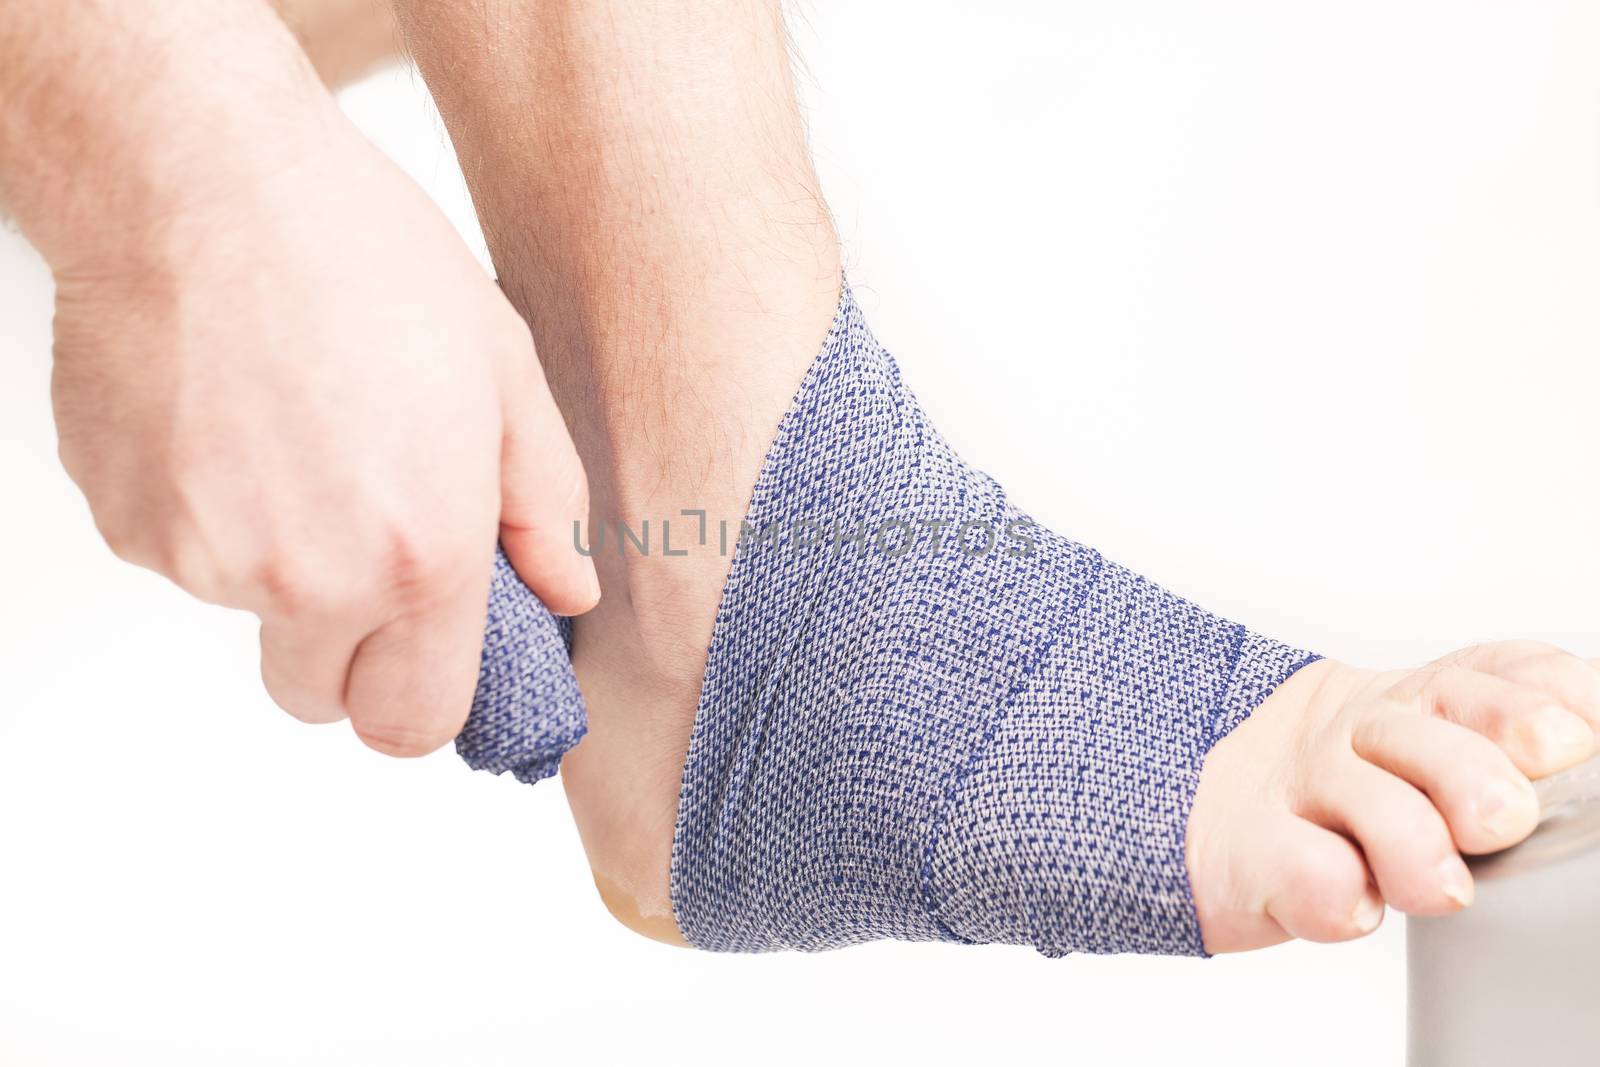 Foot ankle bandage by CatherineL-Prod